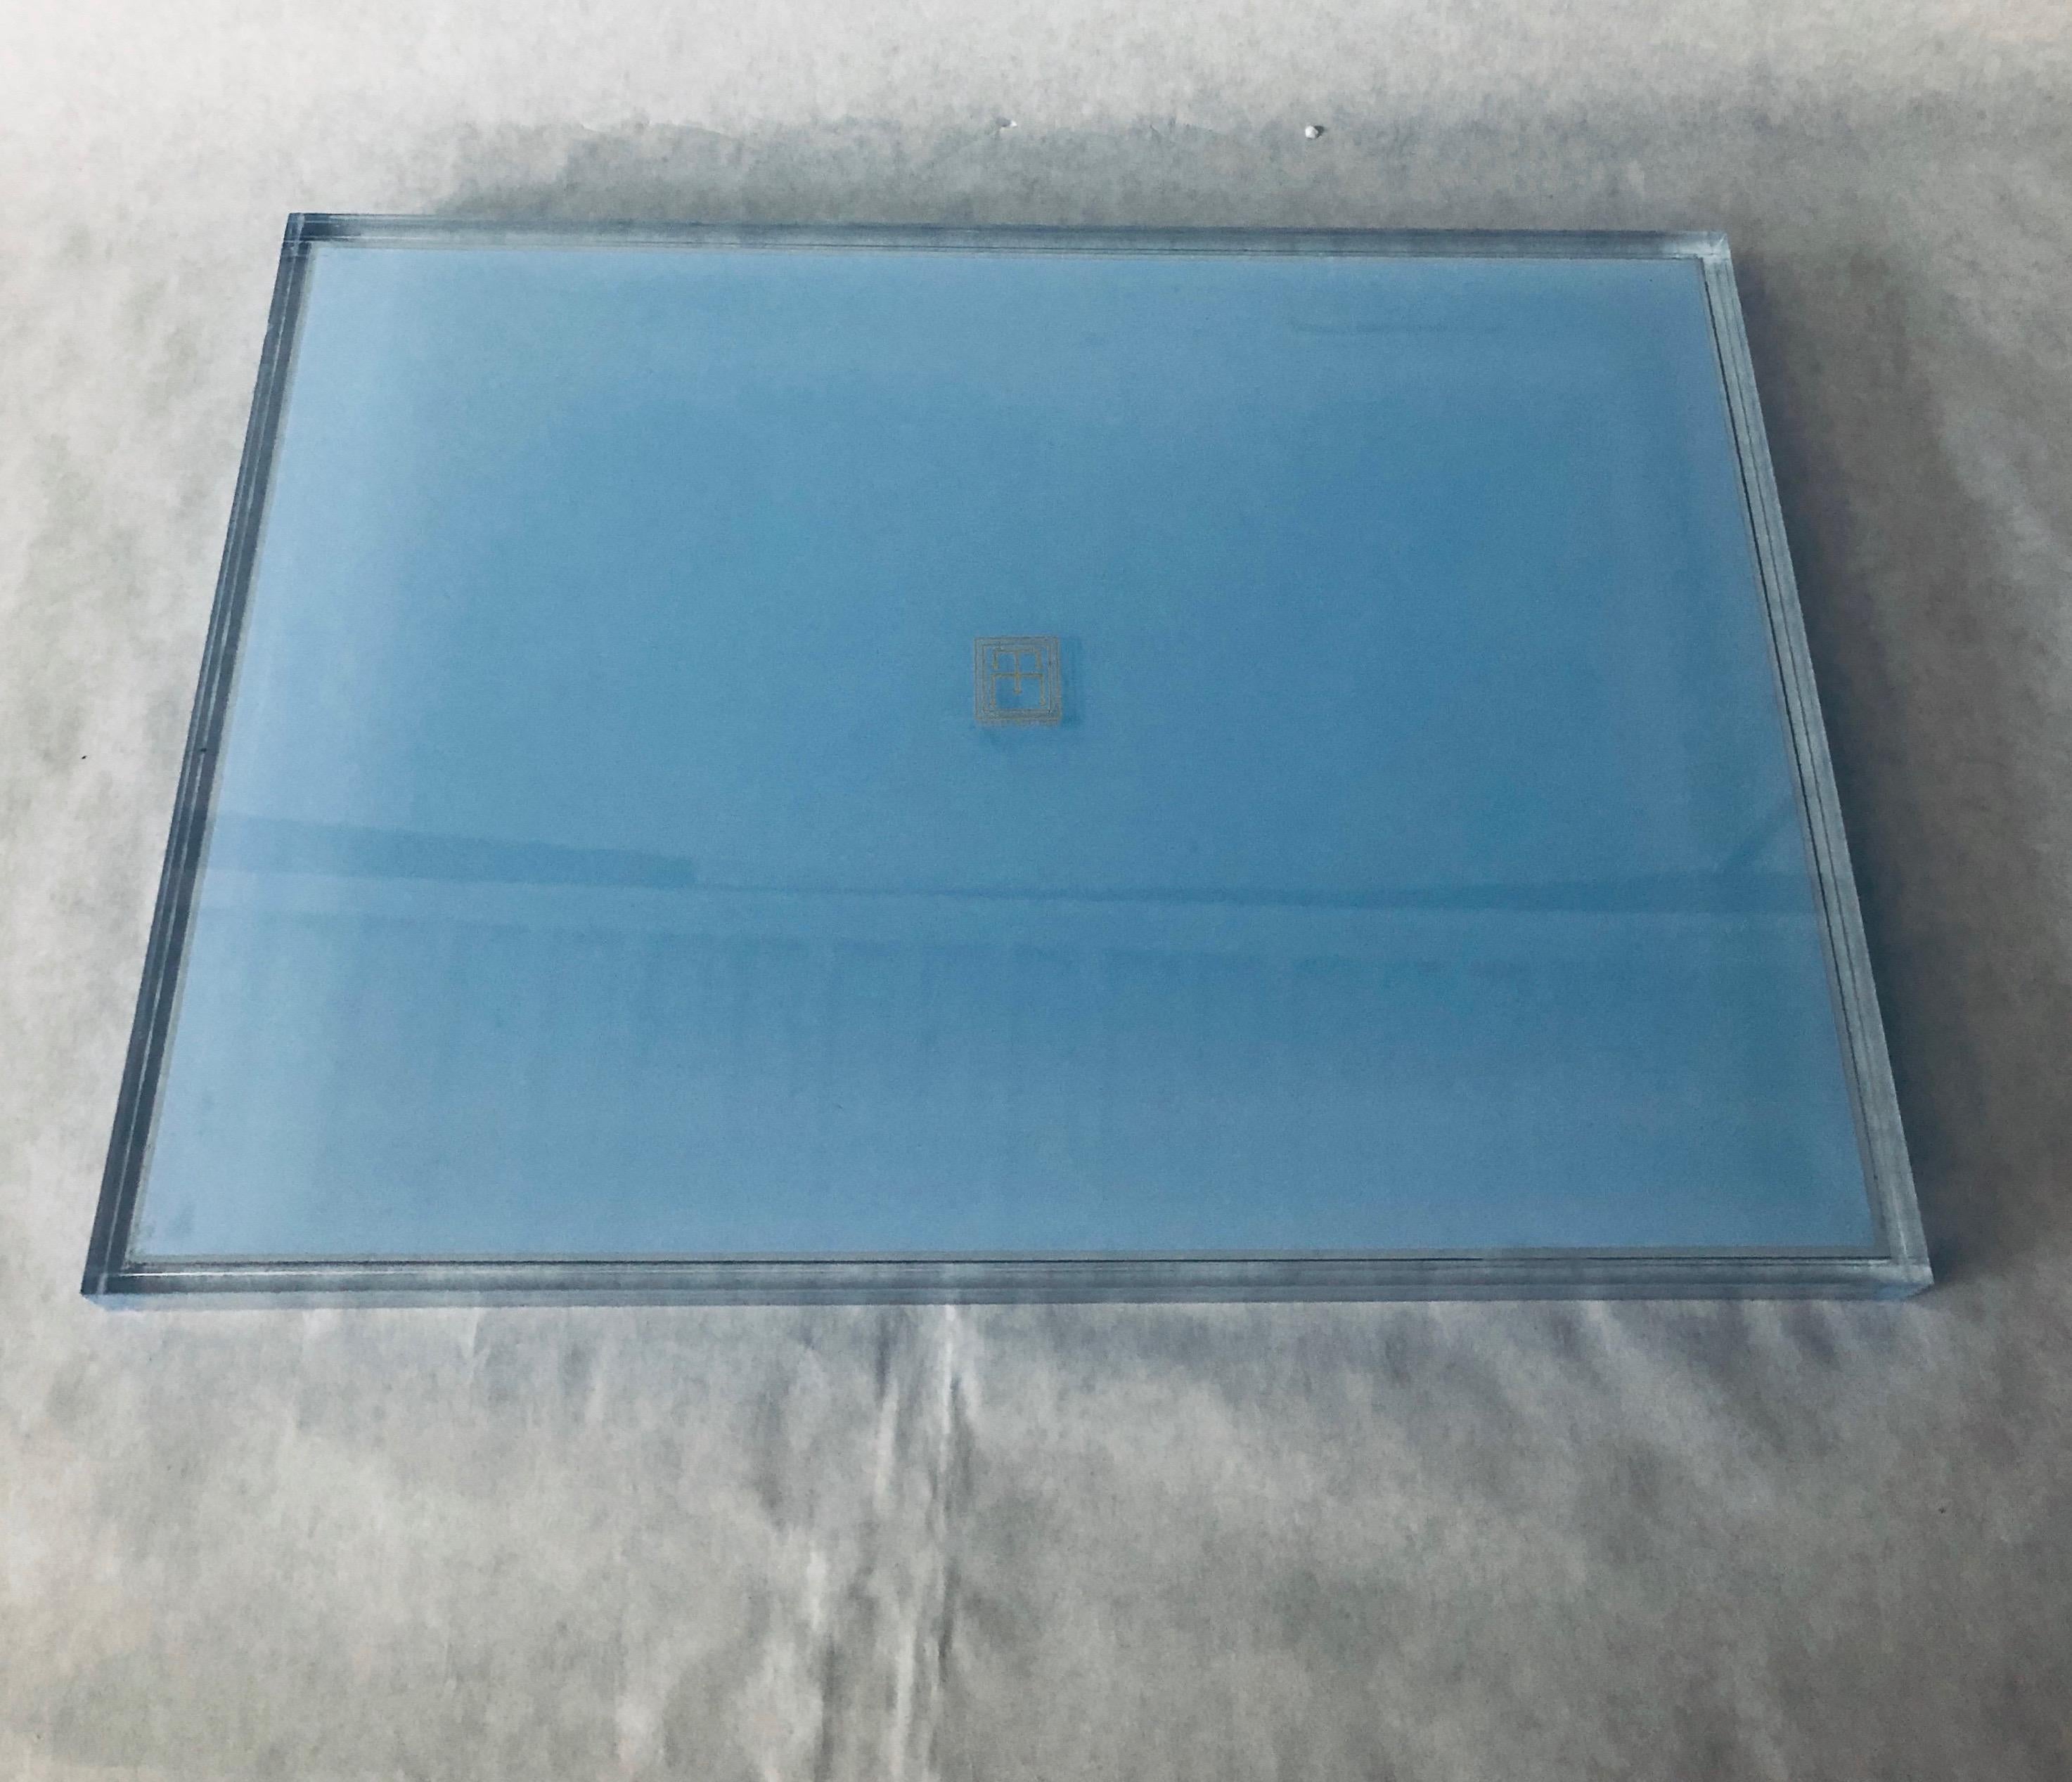 Clear Lucite with Imbedded Blue Border and Mirror Base Decorative Serving Tray 11